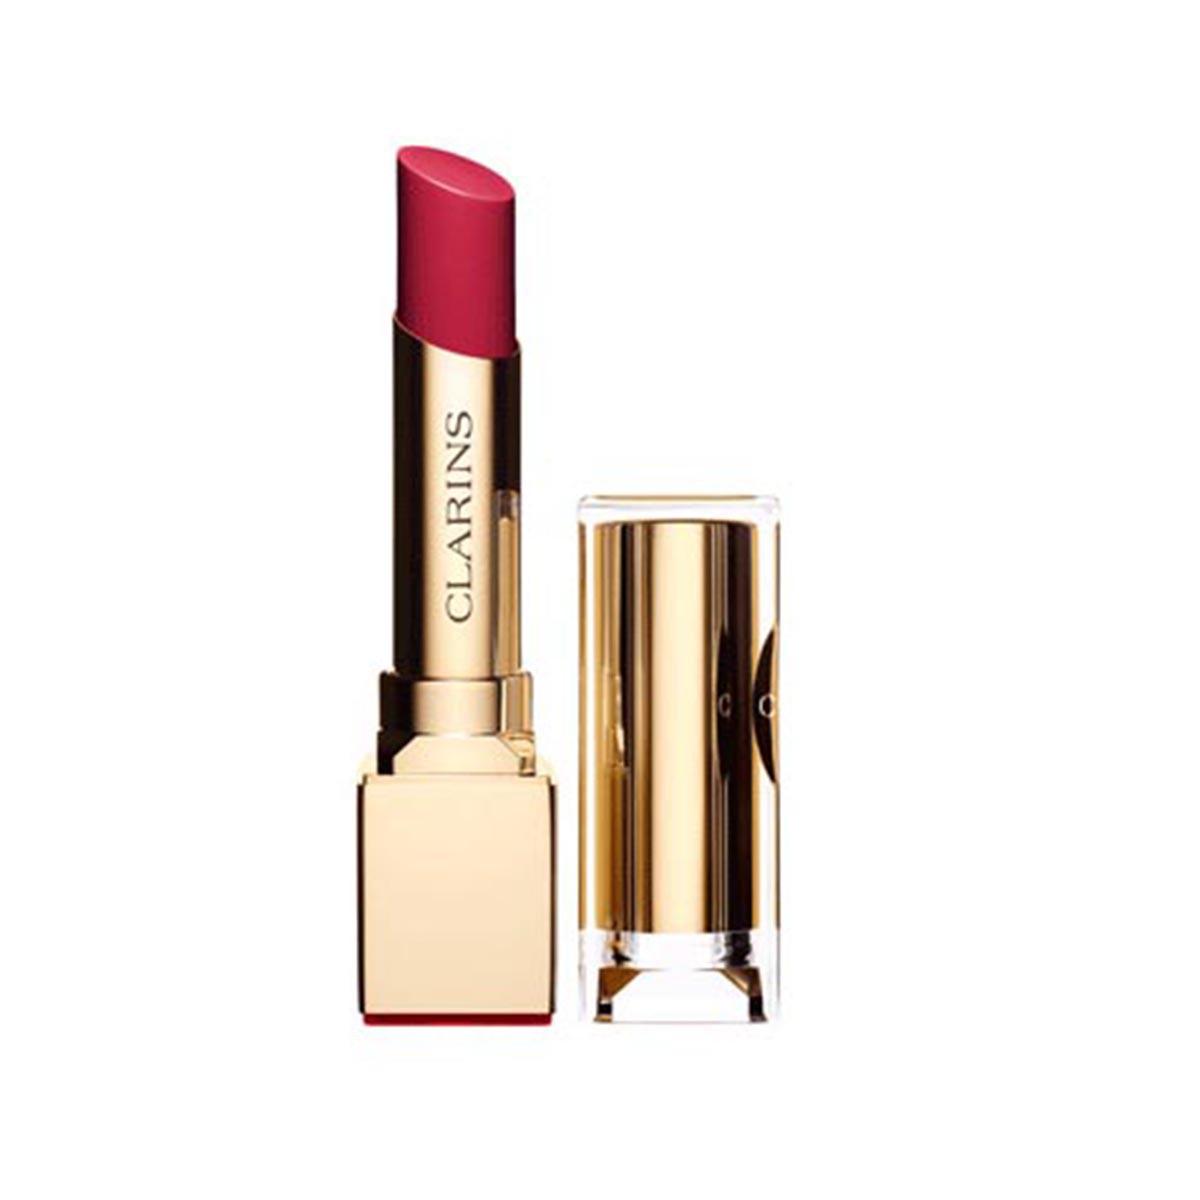 clarins-lips-rouge-03-petal-pink